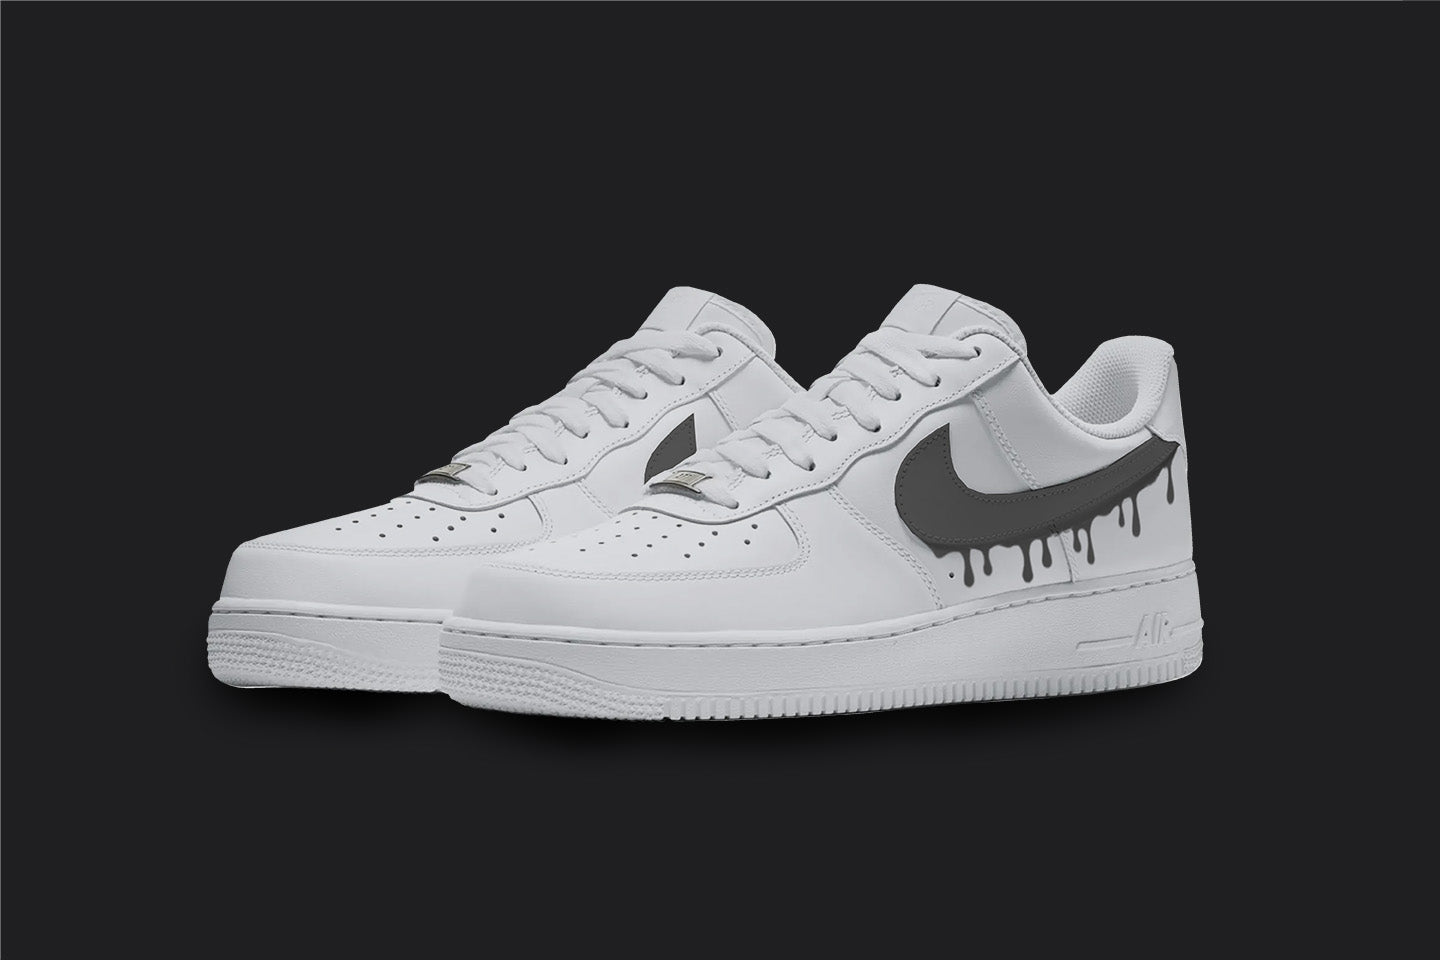 The image is of a Custom Nike Air force 1 sneaker pair on a blank black background. The white custom sneakers have a black dripping design. 